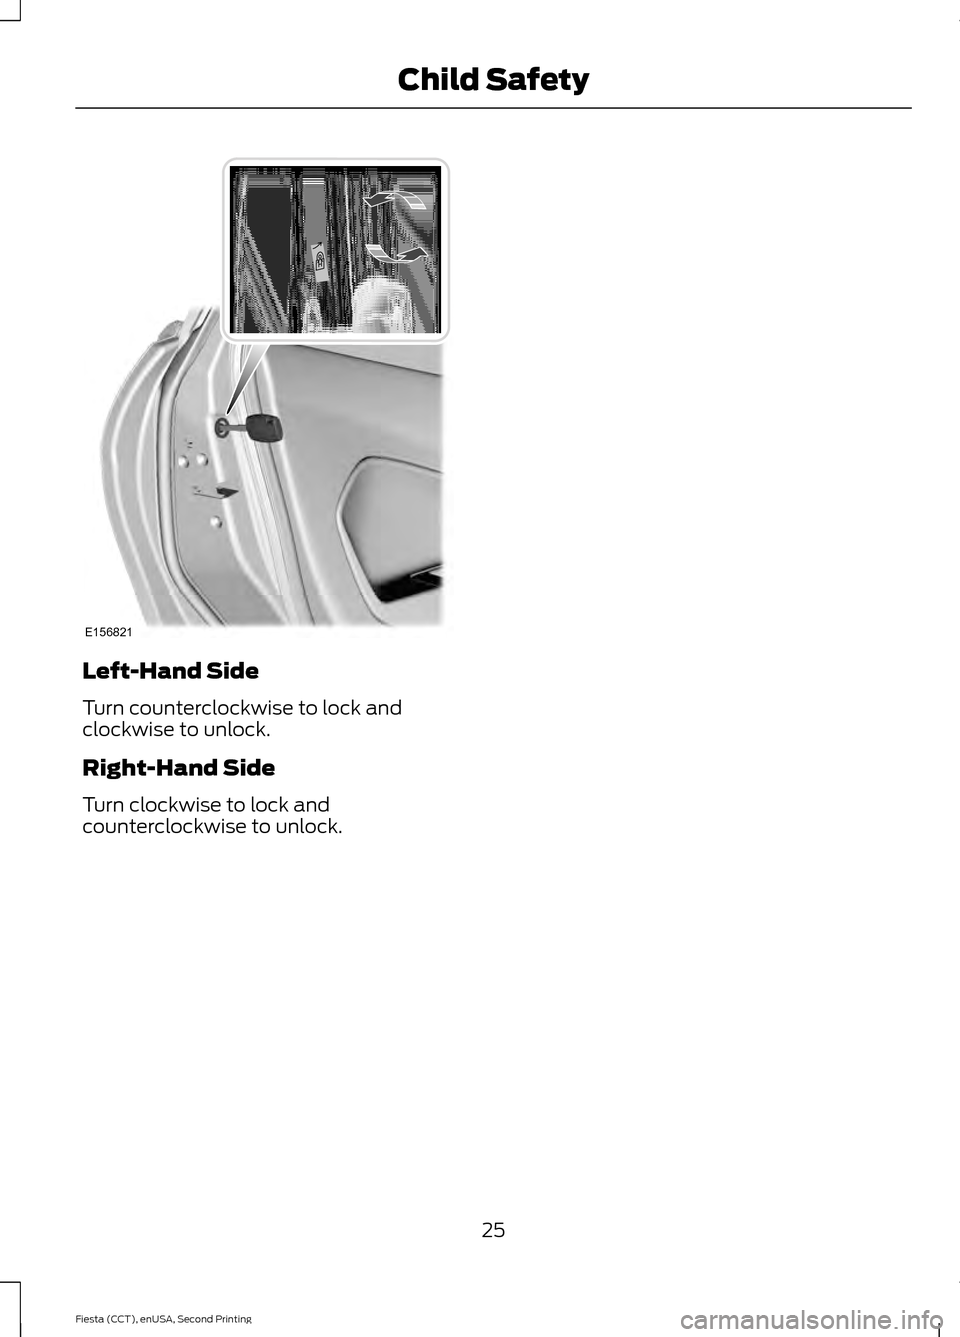 FORD FIESTA 2015 6.G Owners Manual Left-Hand Side
Turn counterclockwise to lock and
clockwise to unlock.
Right-Hand Side
Turn clockwise to lock and
counterclockwise to unlock.
25
Fiesta (CCT), enUSA, Second Printing Child SafetyE156821